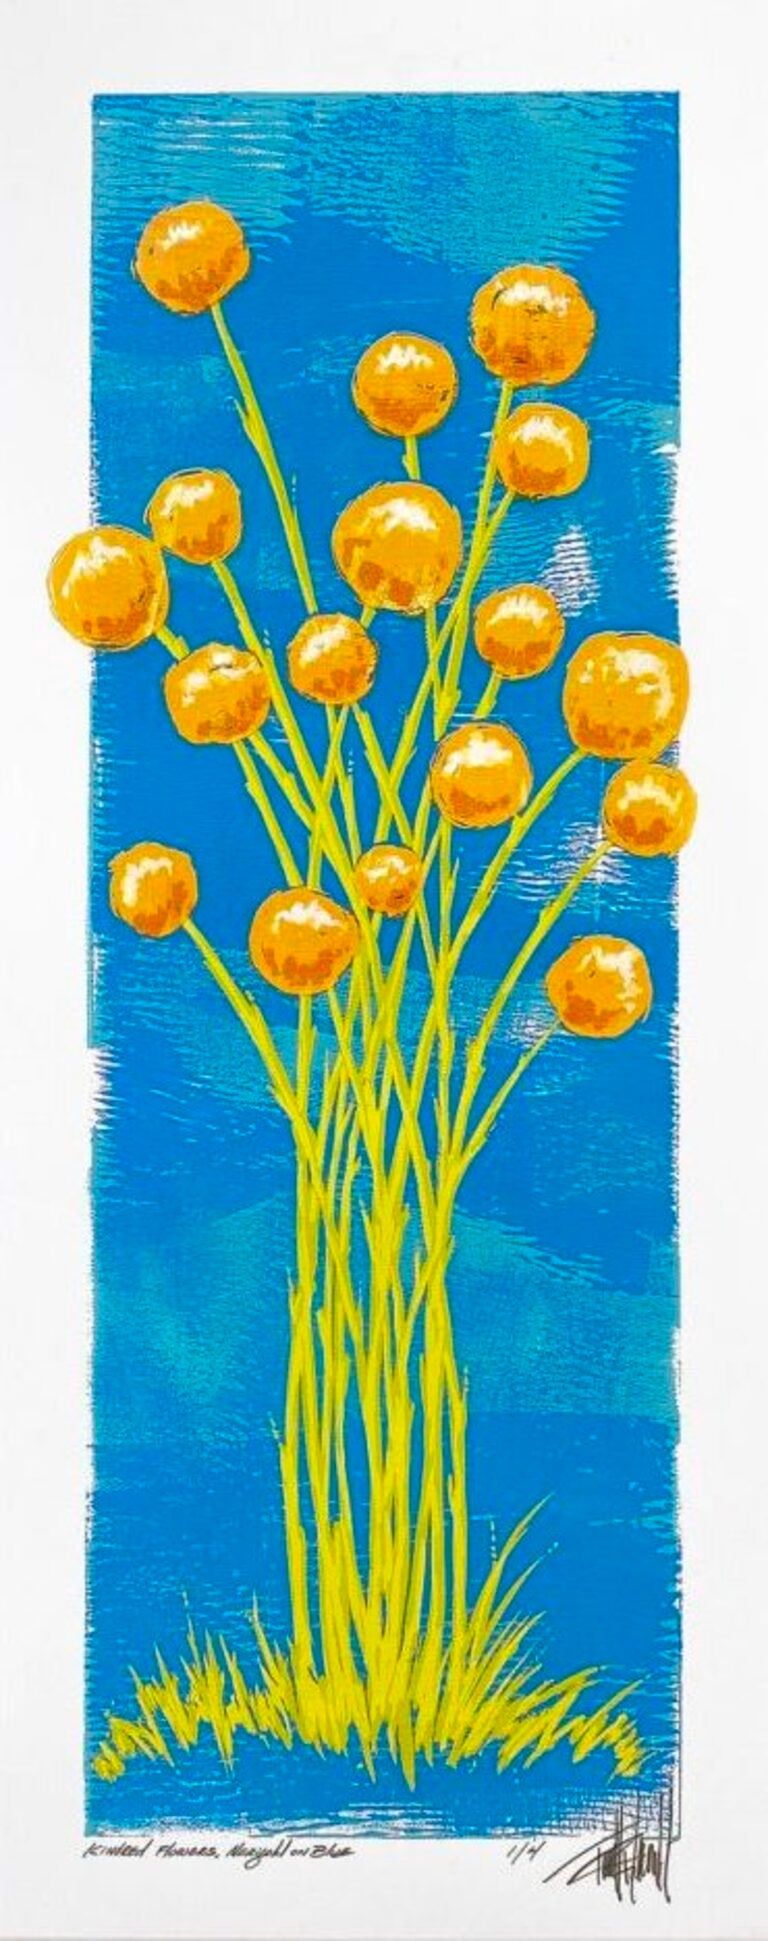 Terrell Thornhill  Landscape Print - Kindred Flowers, Marigold on Blue (2/4)